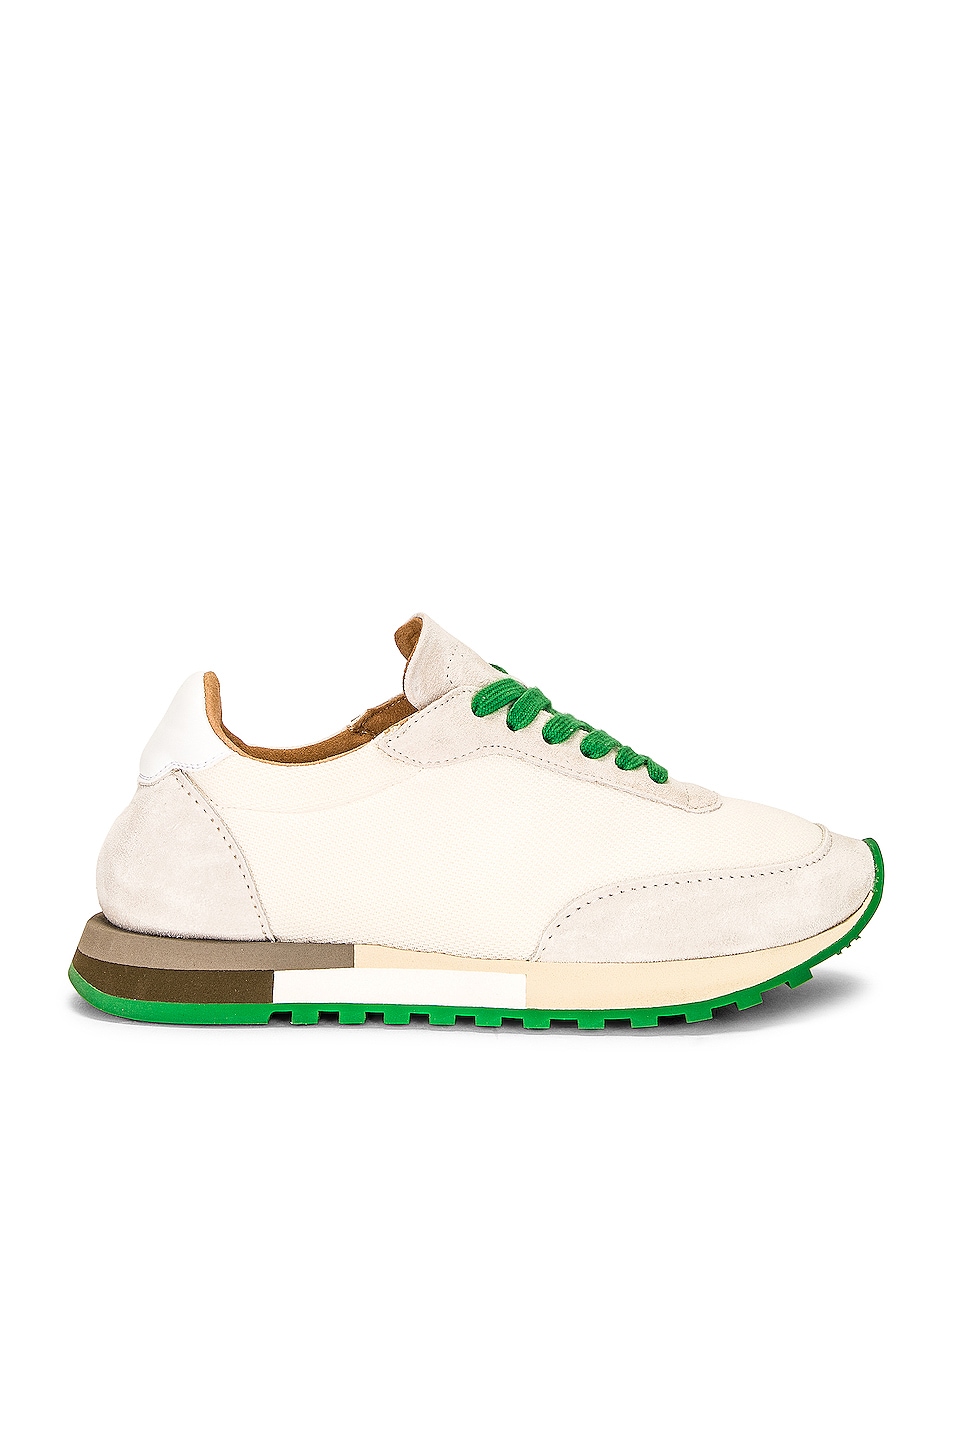 Image 1 of The Row Owen Runner Sneakers in Ivory & Green